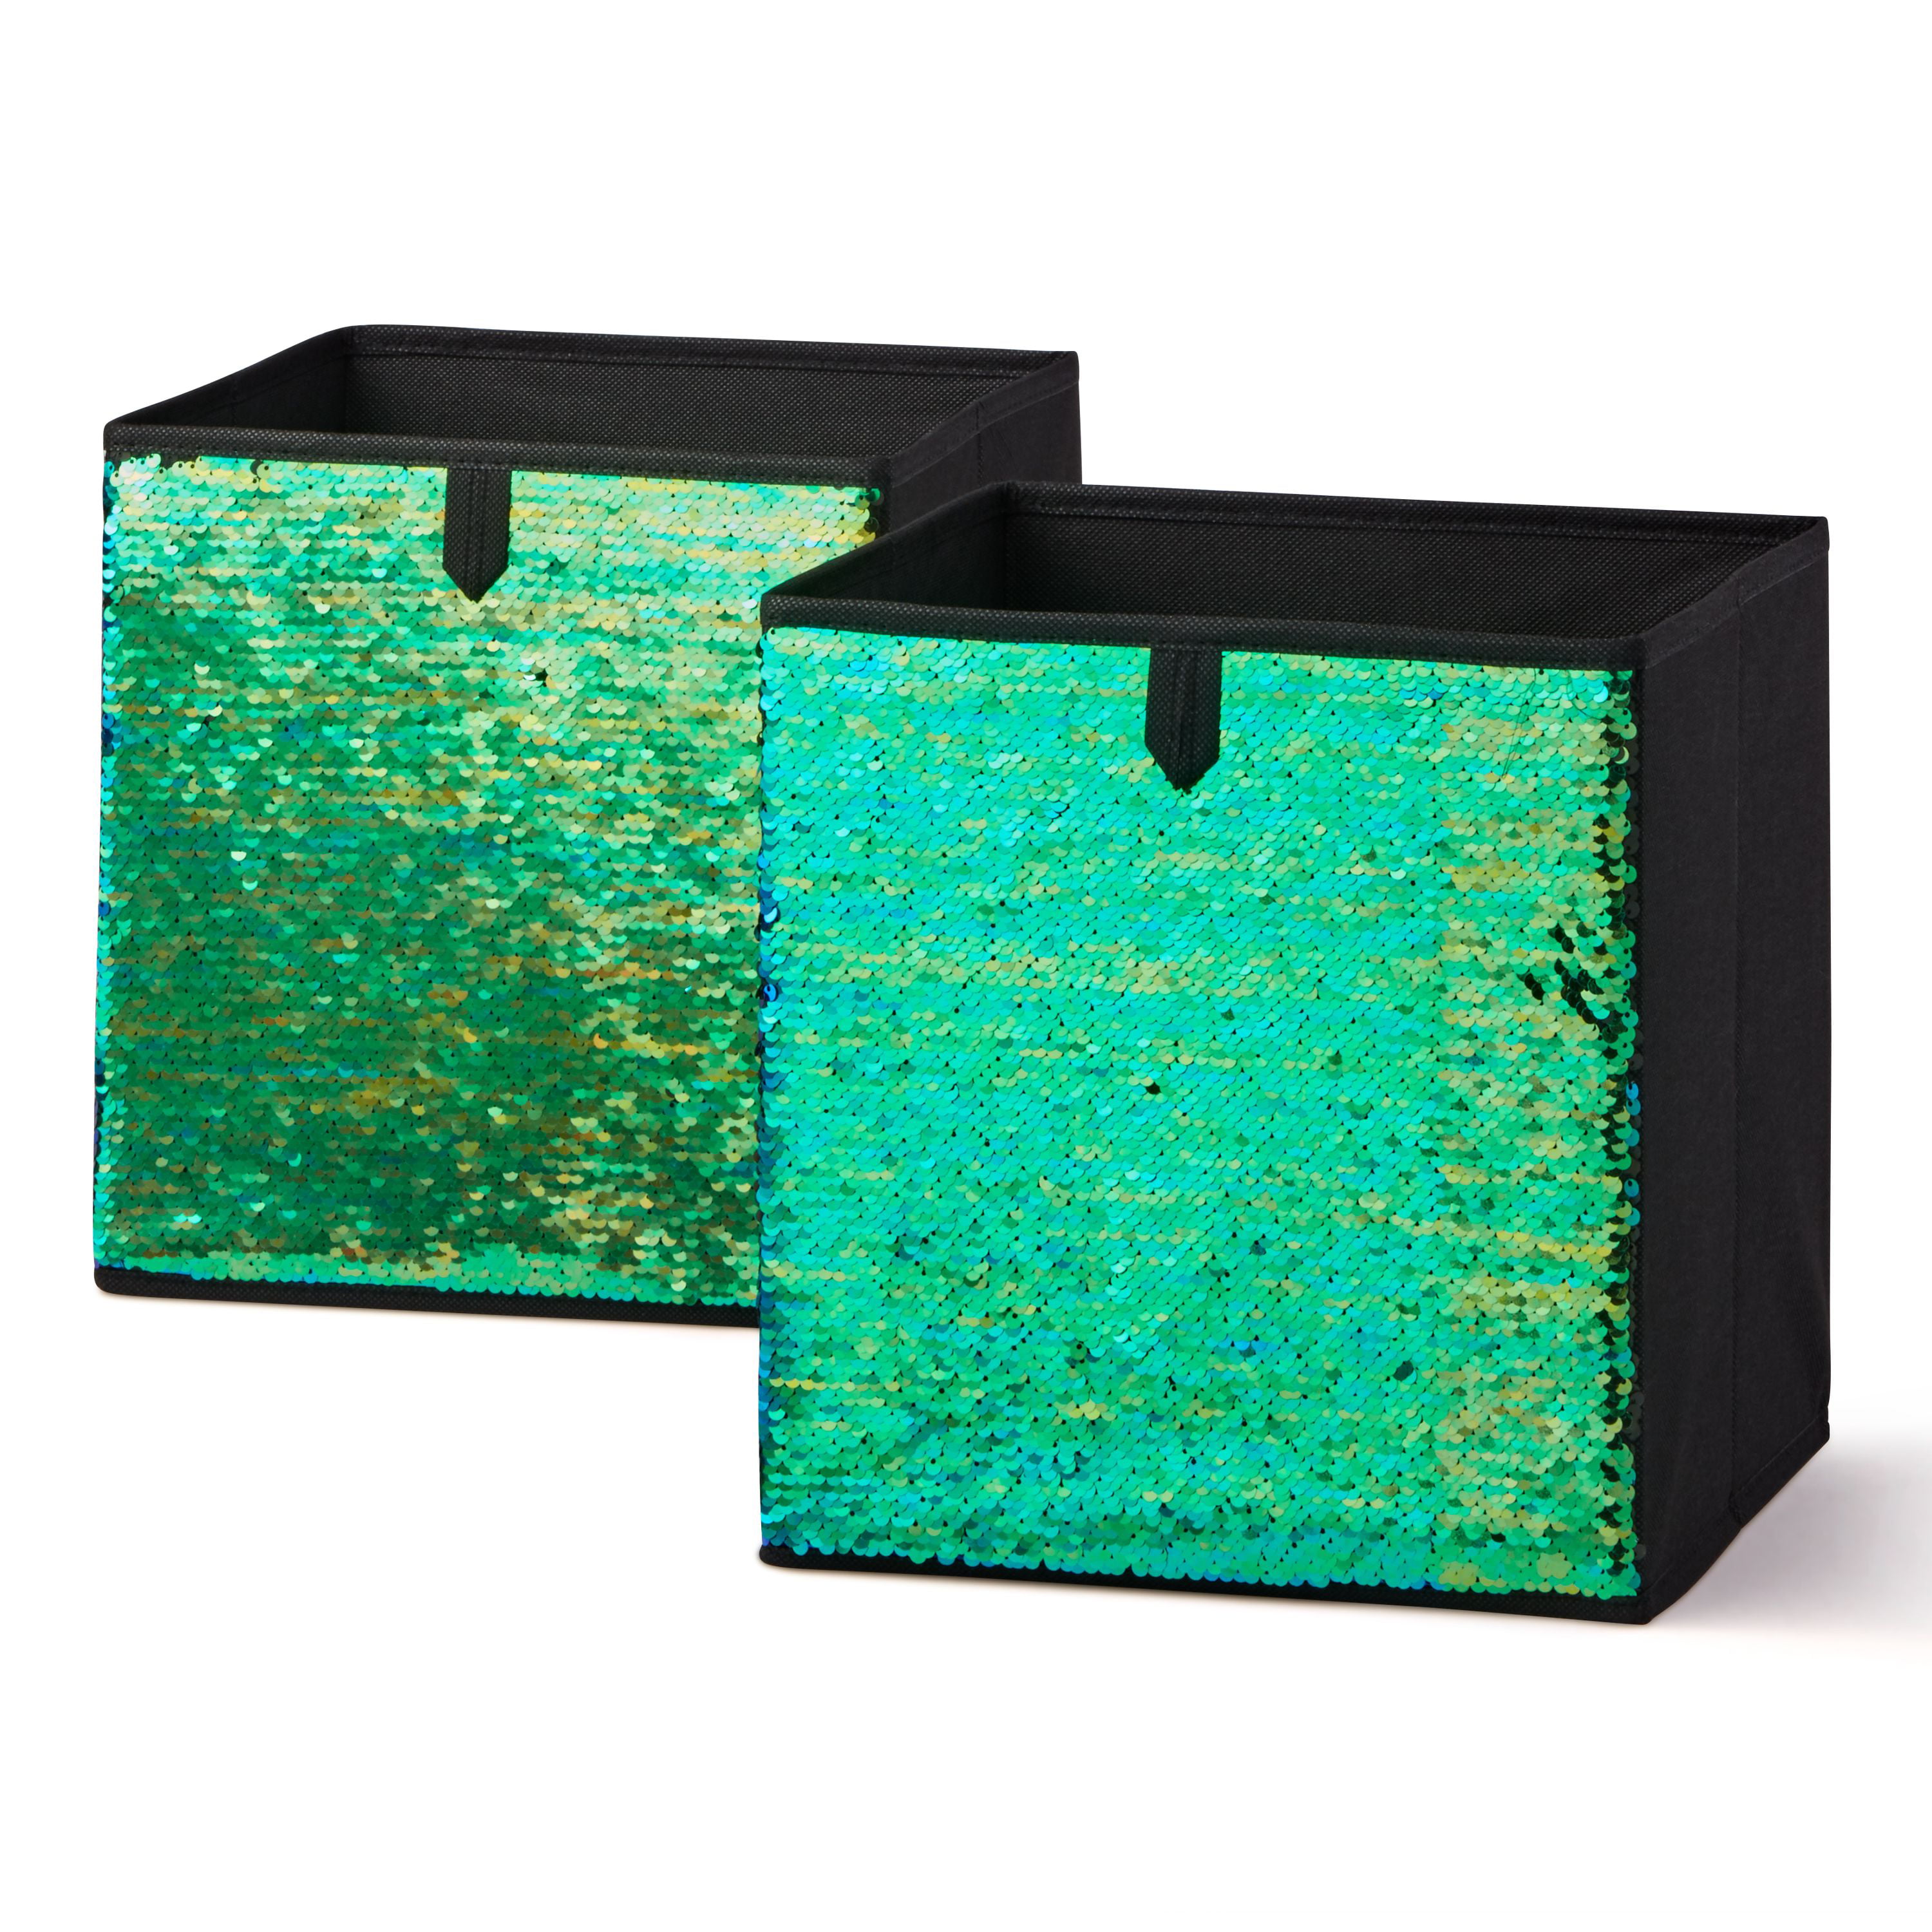 2x Glitter Teal Reversible Sequin Collapsible Storage Cube Bin Basket Box Home 